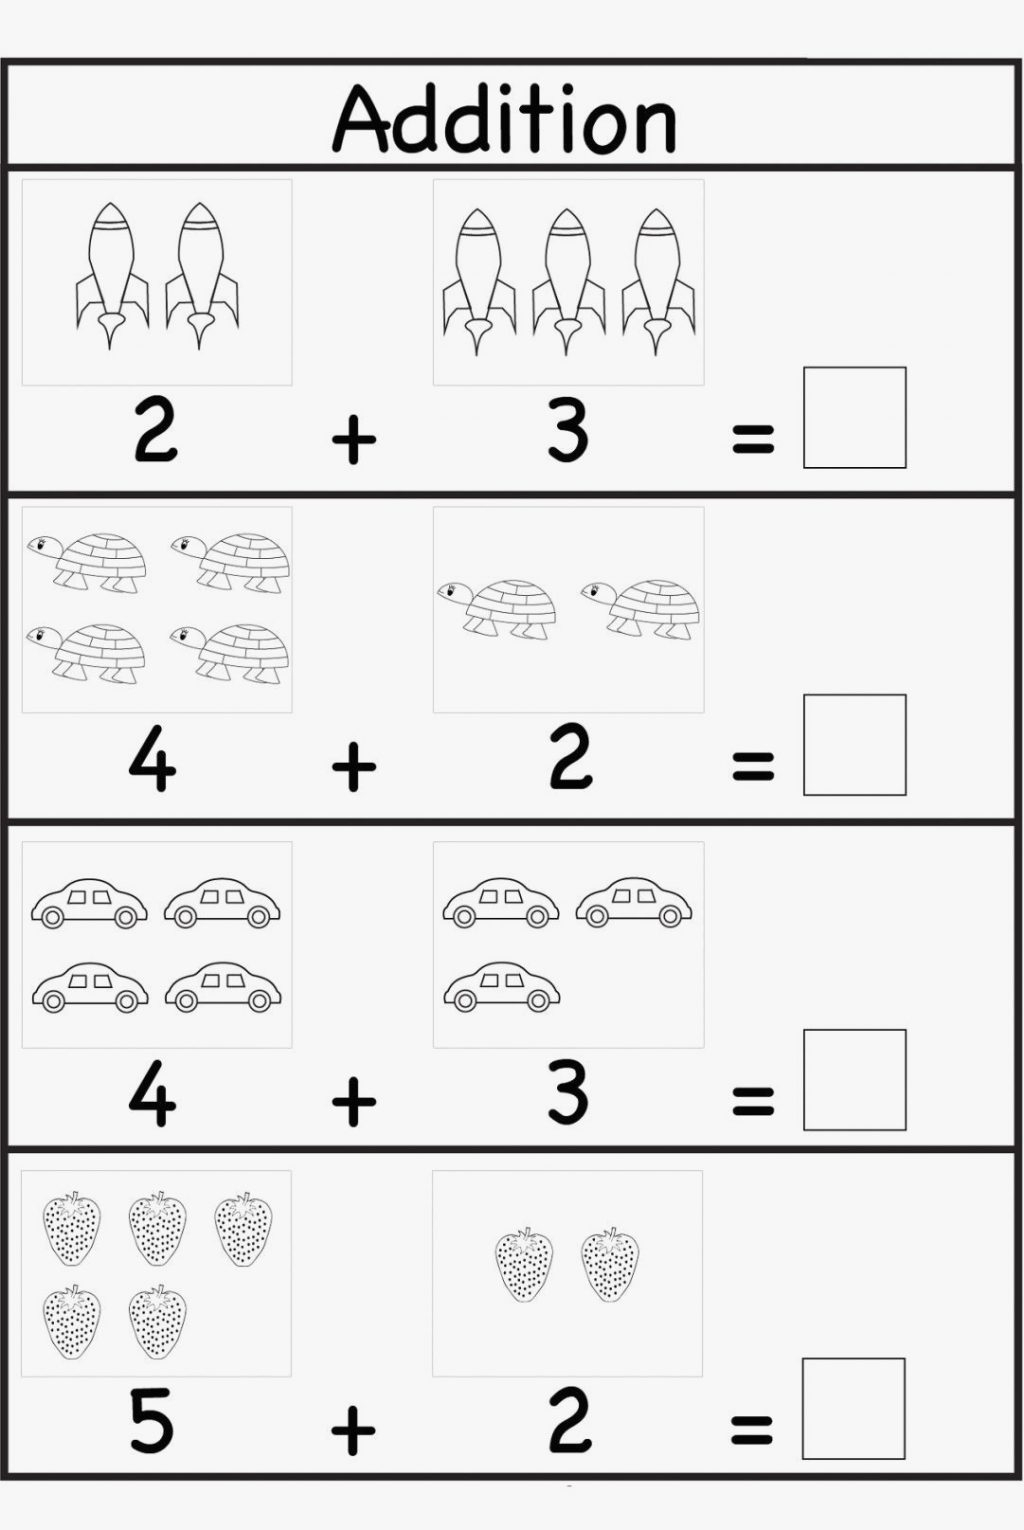 Printable English Worksheets For 5 Year Olds